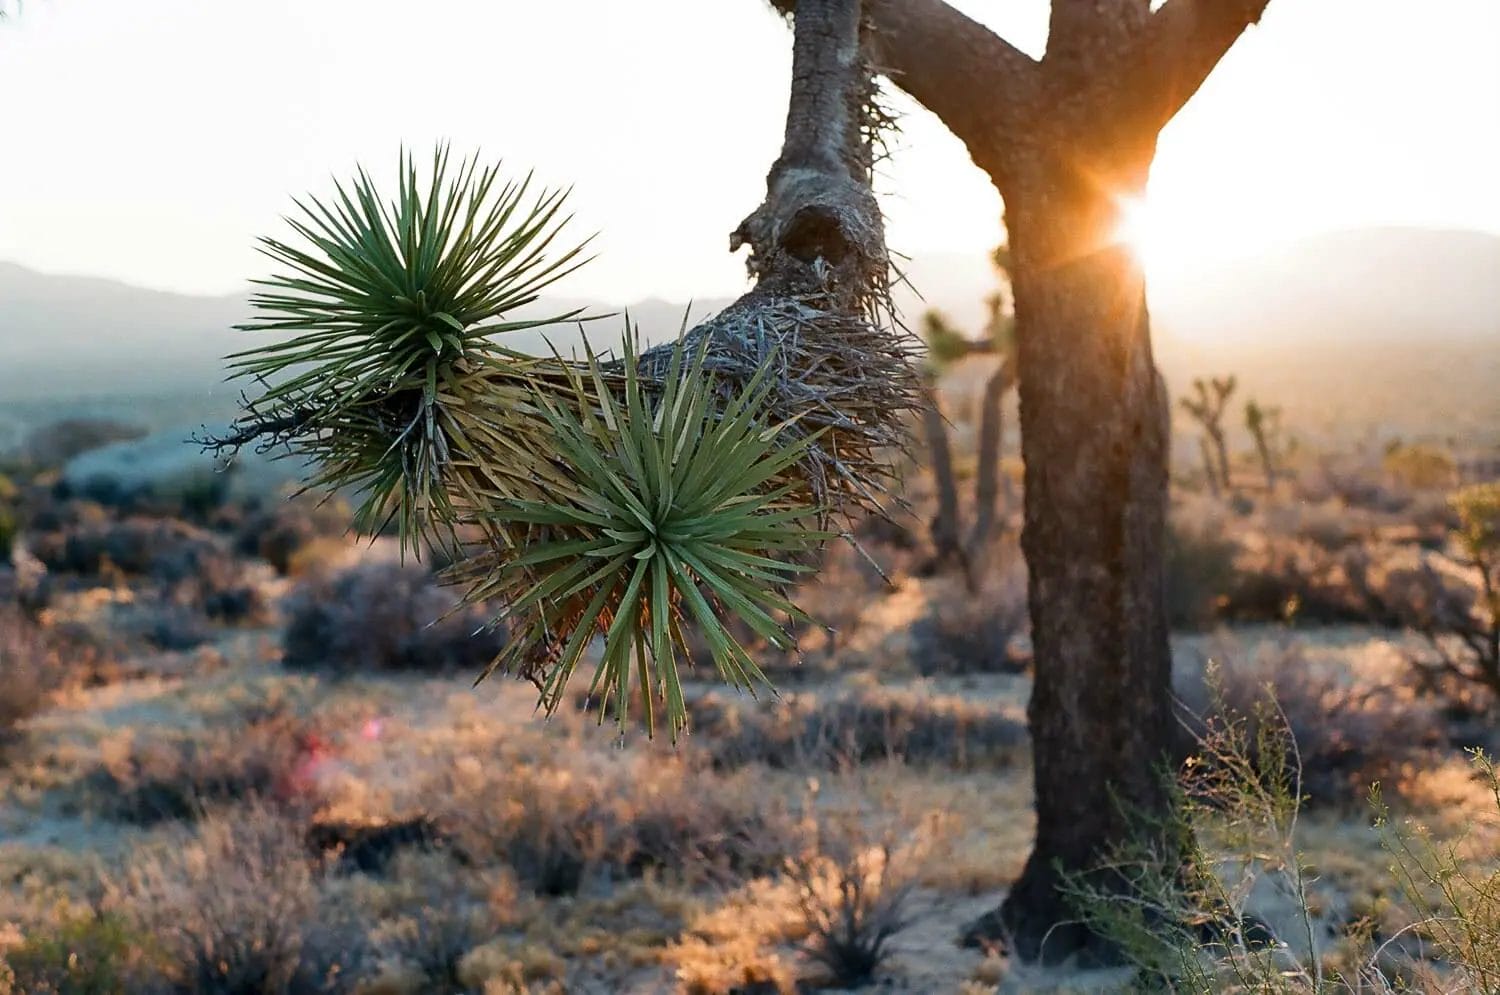 Sunset in a desert with a close-up of a joshua tree branch.